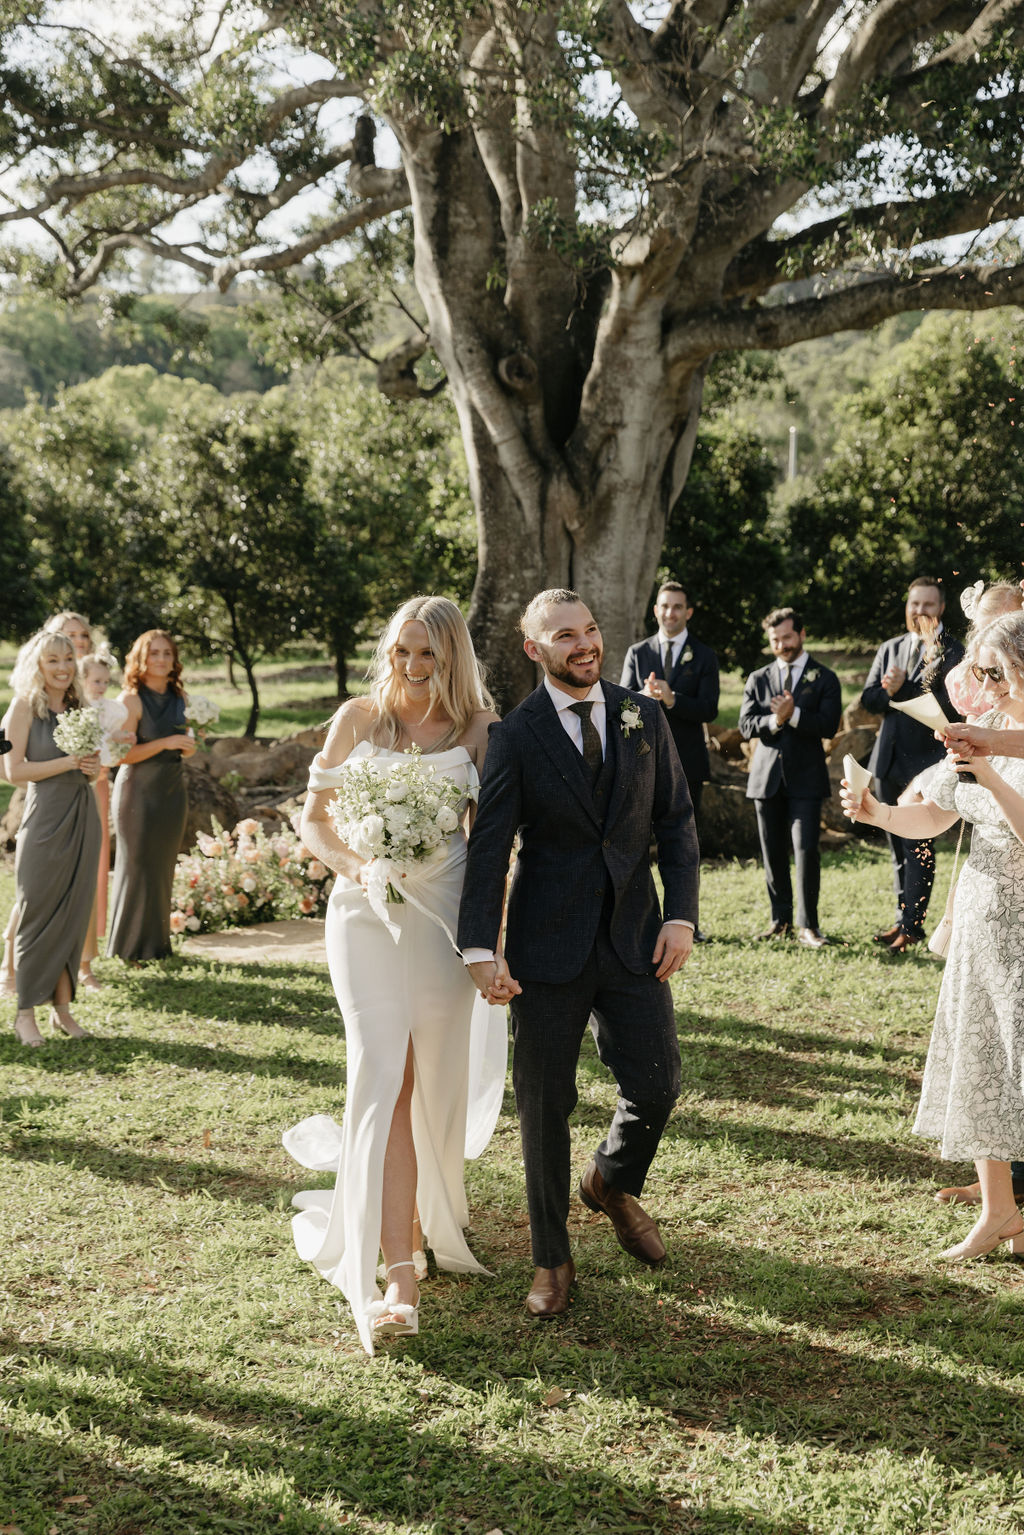 Ciara and Brett's Tides Byron Estate wedding captured by Milk and Honey photography